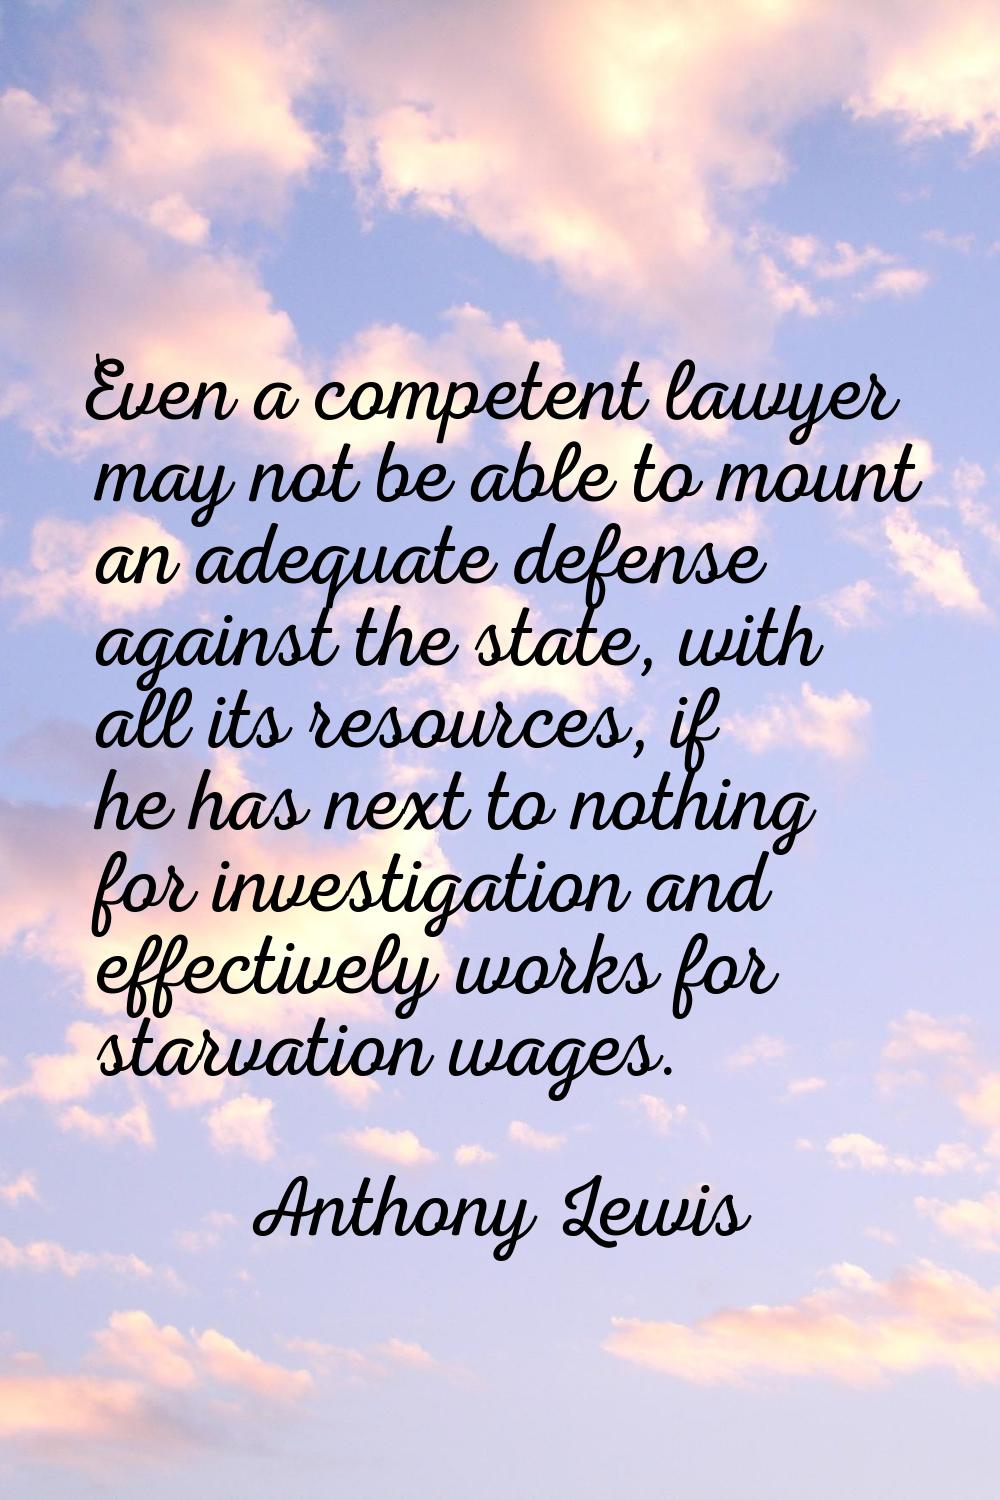 Even a competent lawyer may not be able to mount an adequate defense against the state, with all it